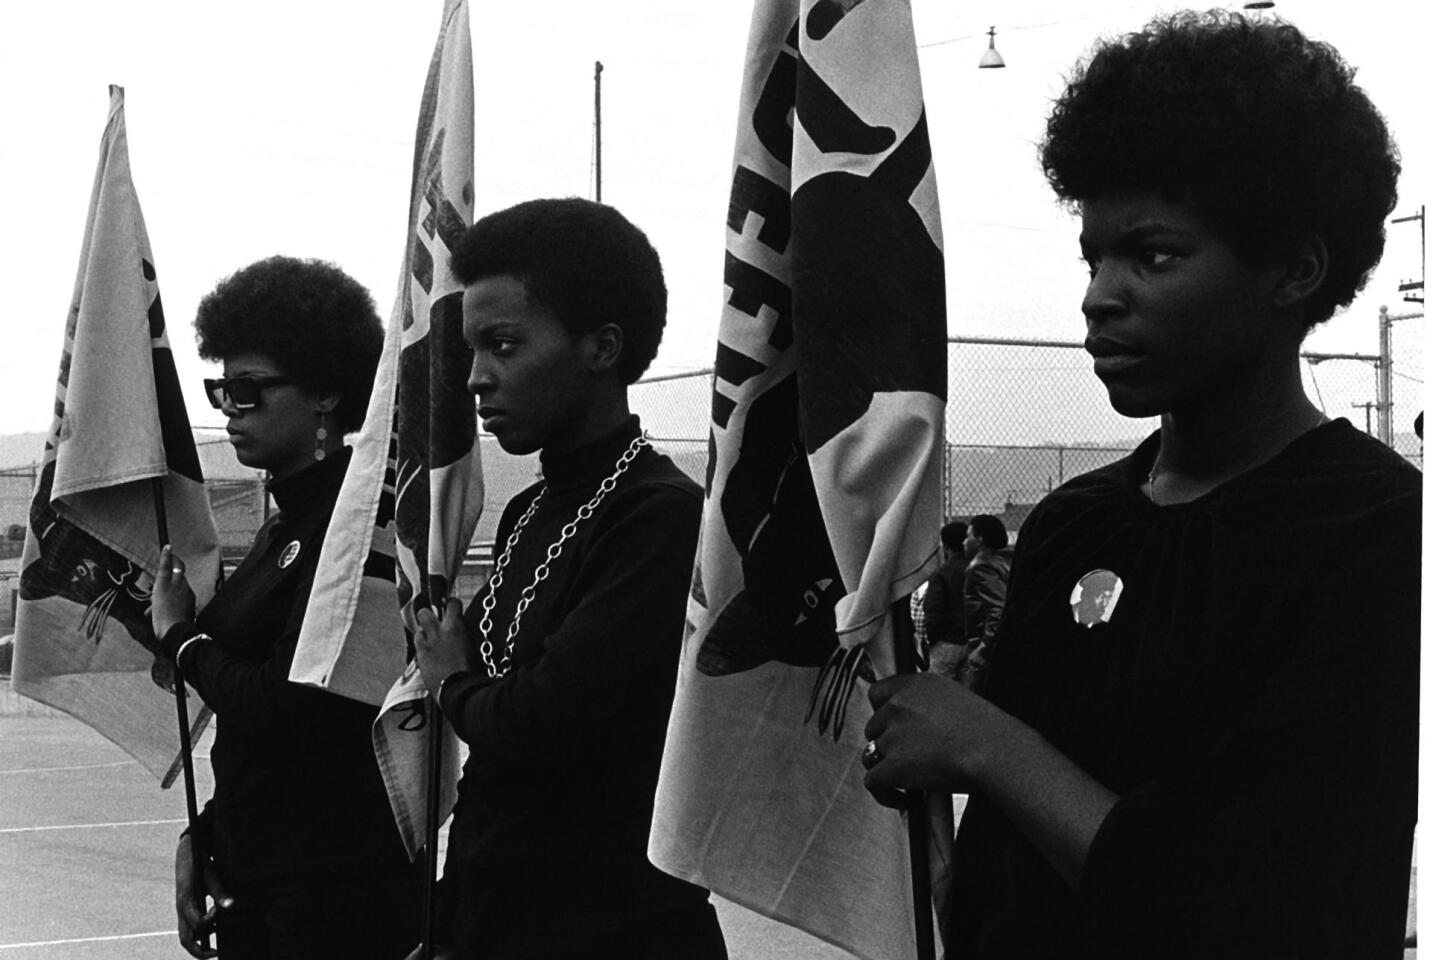 A documentary about the history and legacy of the Black Panther Party. Directed by Stanley Nelson. PBS Distribution